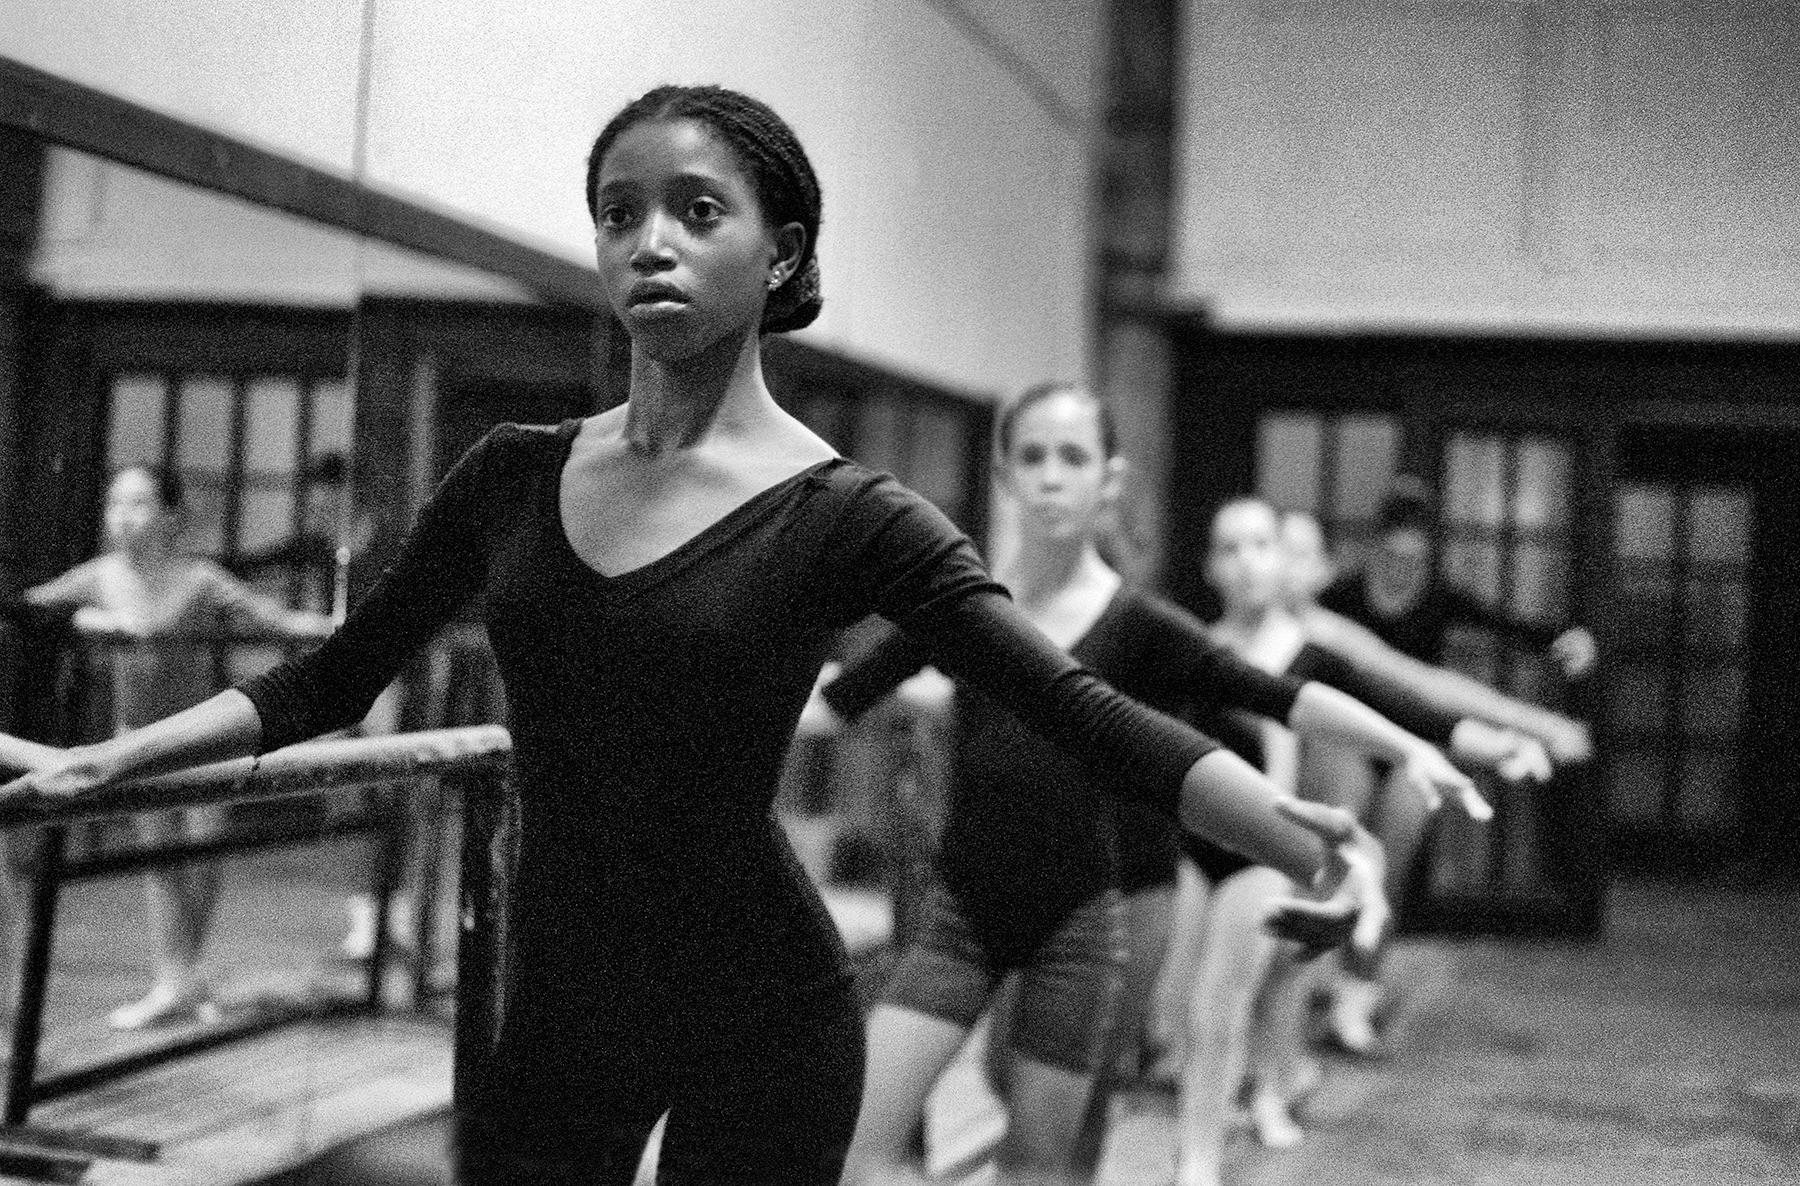 Students of the Spanish School of Dance in the Gran Teatro of Havana.

James Sparshatt’s black and white portraits are a search for a connection with a world of emotions.

The work is available as a delicious palladium platinum print by 31 Studio –